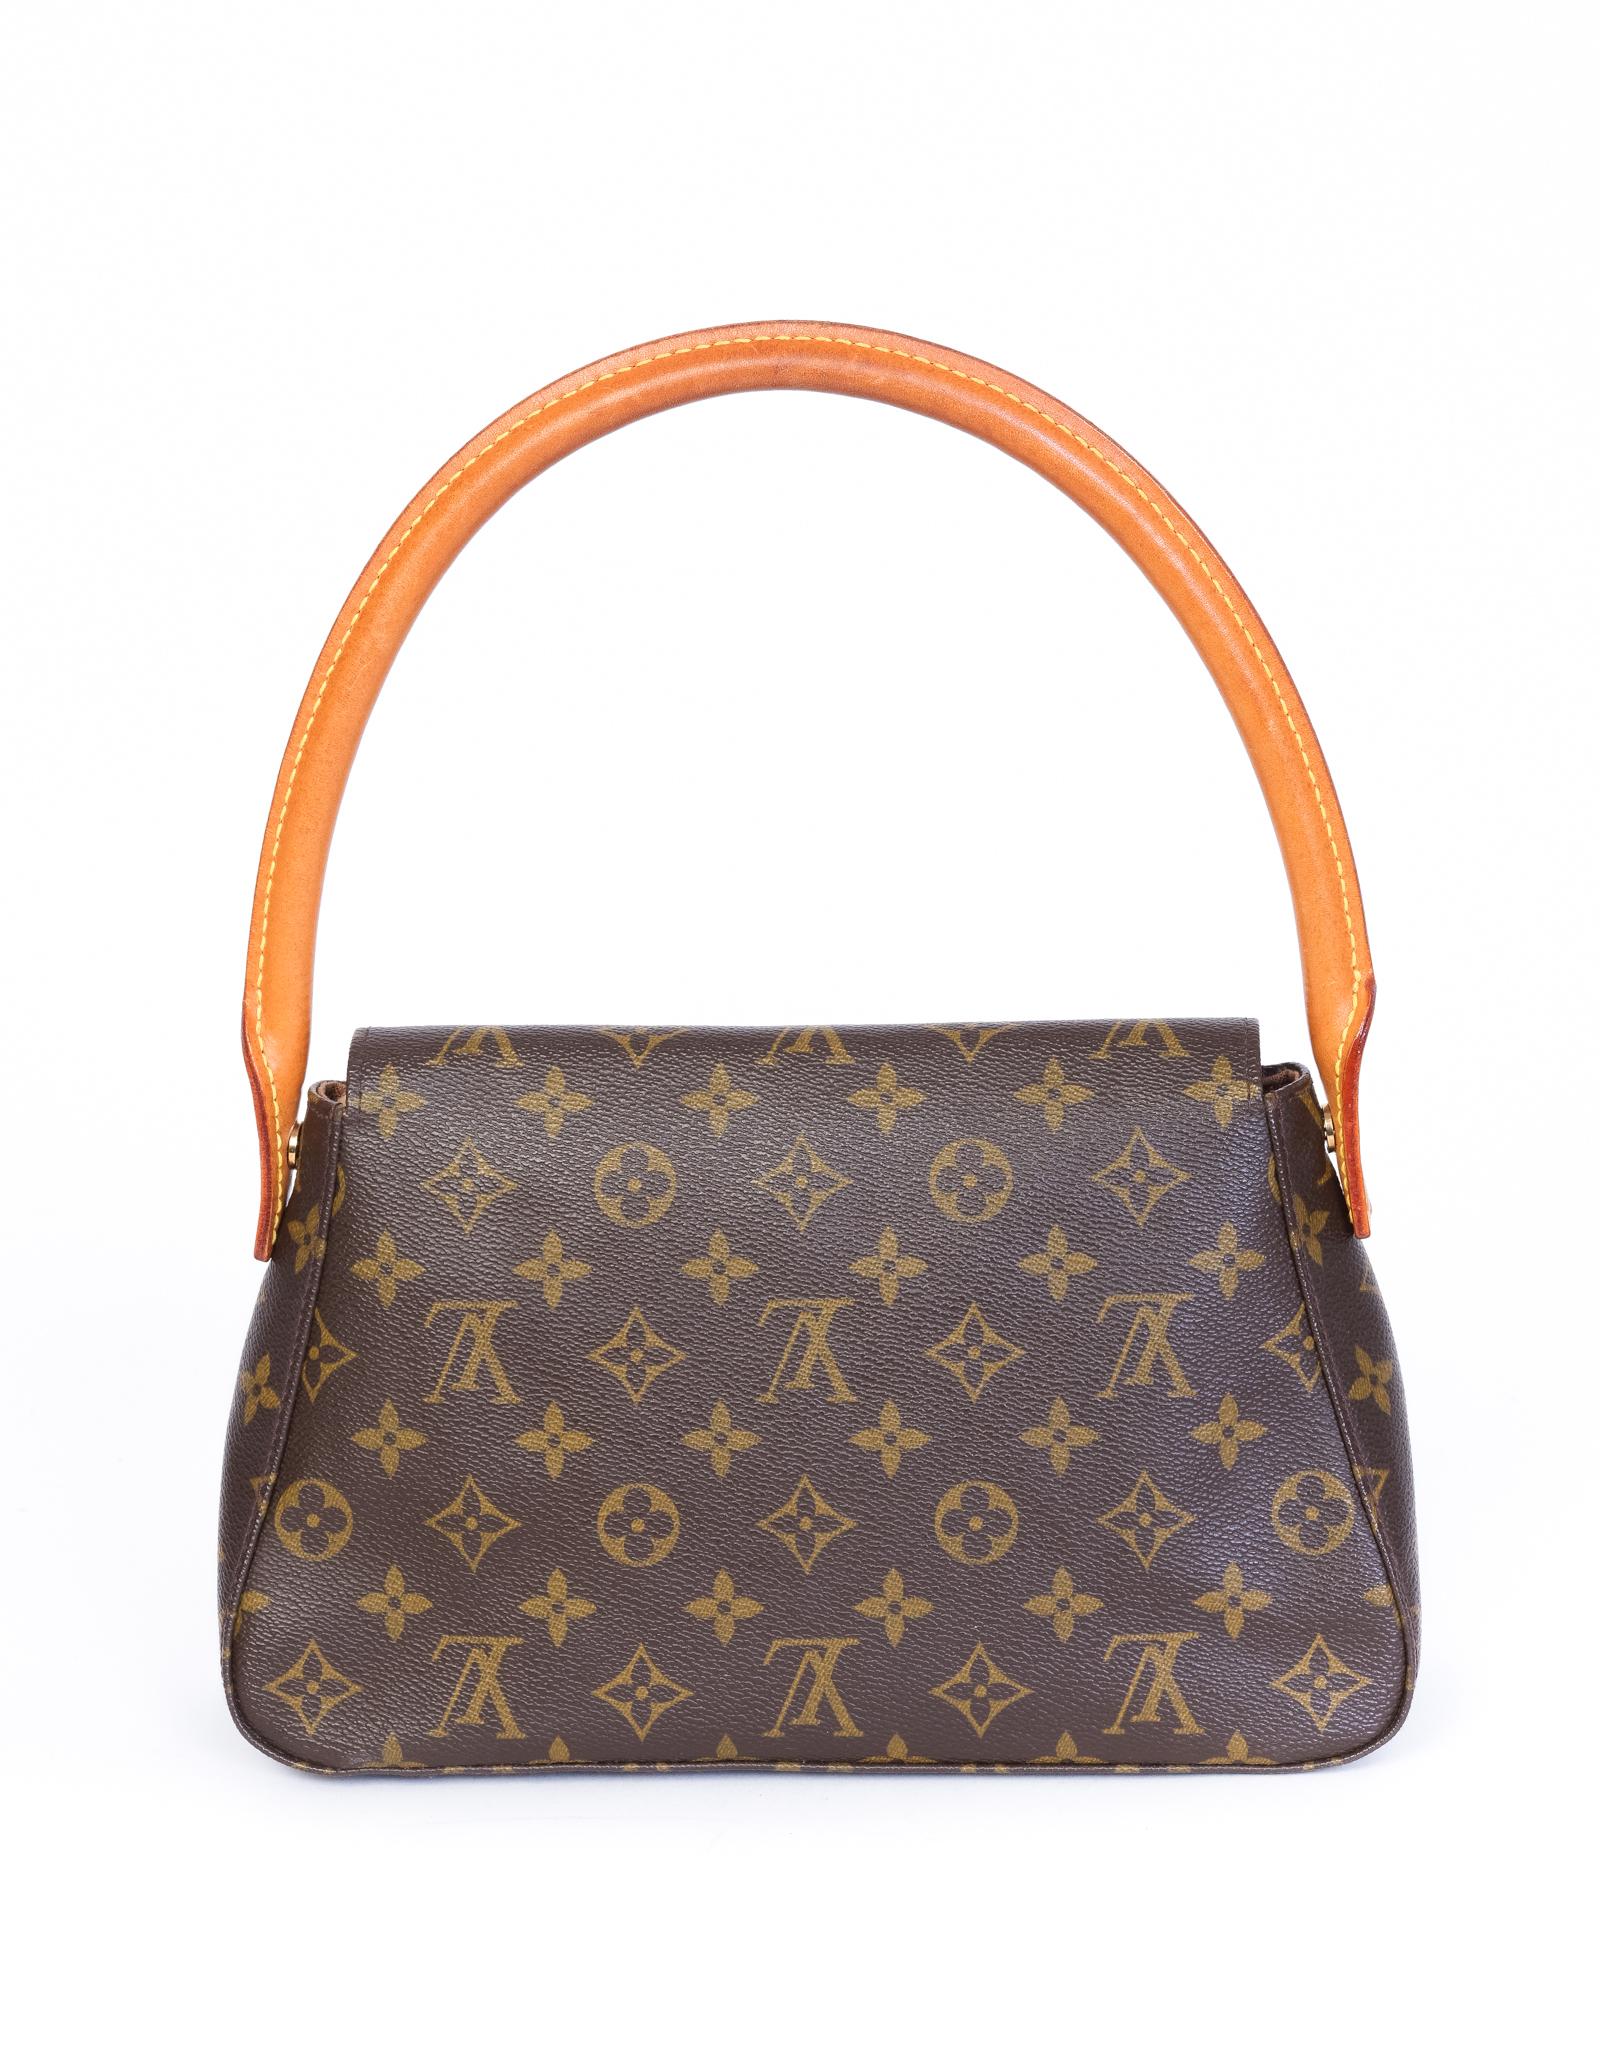 This Louis Vuitton Looping Bag is made with brown canvas with monogram print.  Featuring vachetta leather trim, gold toned hardware, a front flap with magnetic snap closure and a brown woven fabric interior lining with a single interior zip